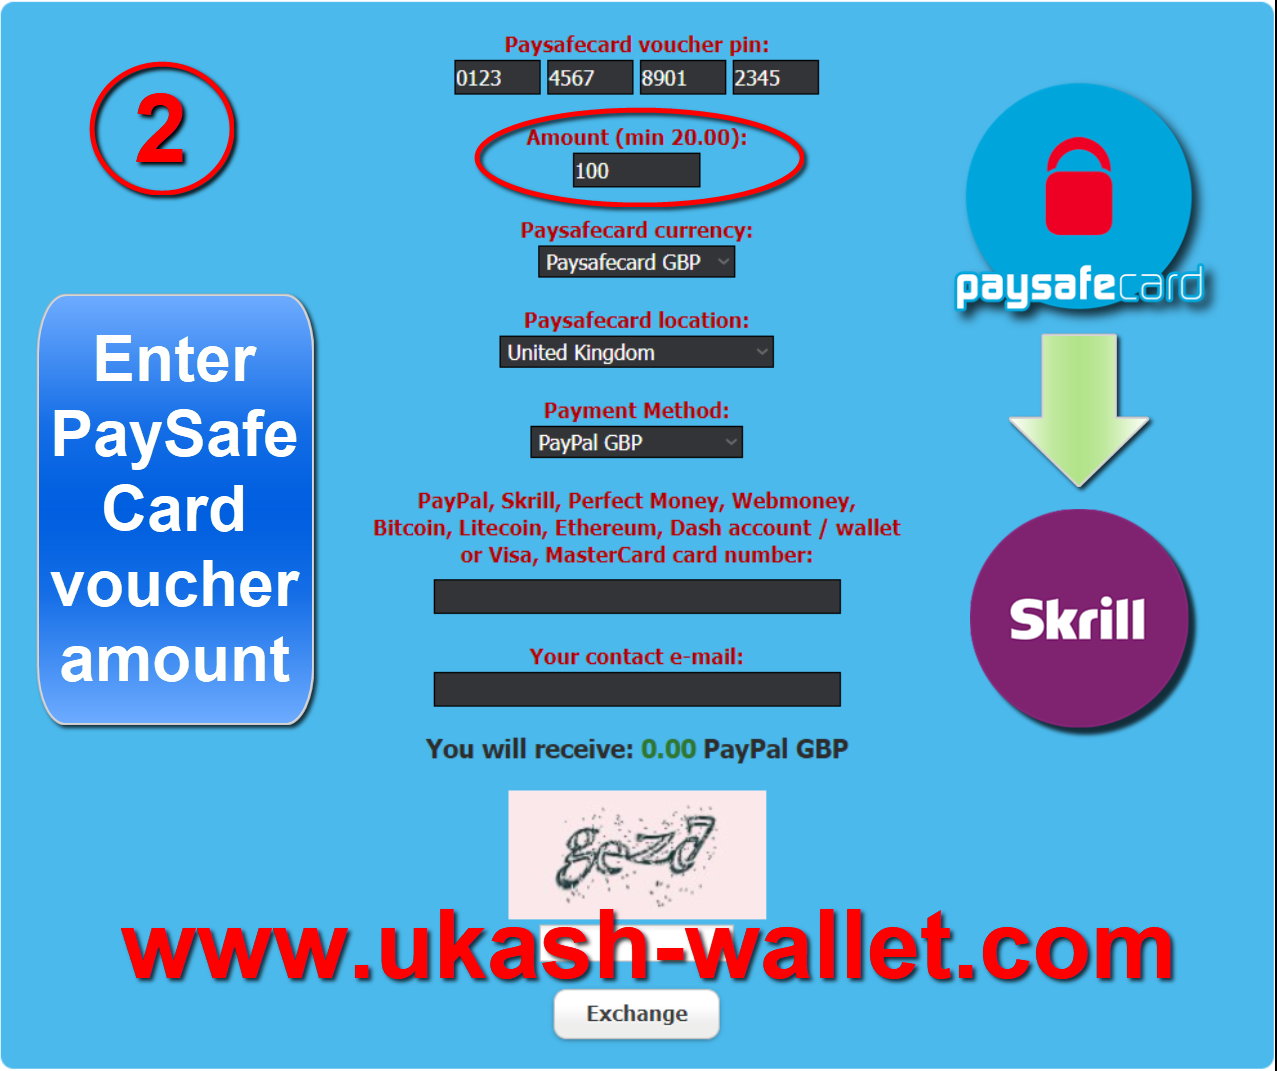 Paysafecard to Skrill transfer - Step two.